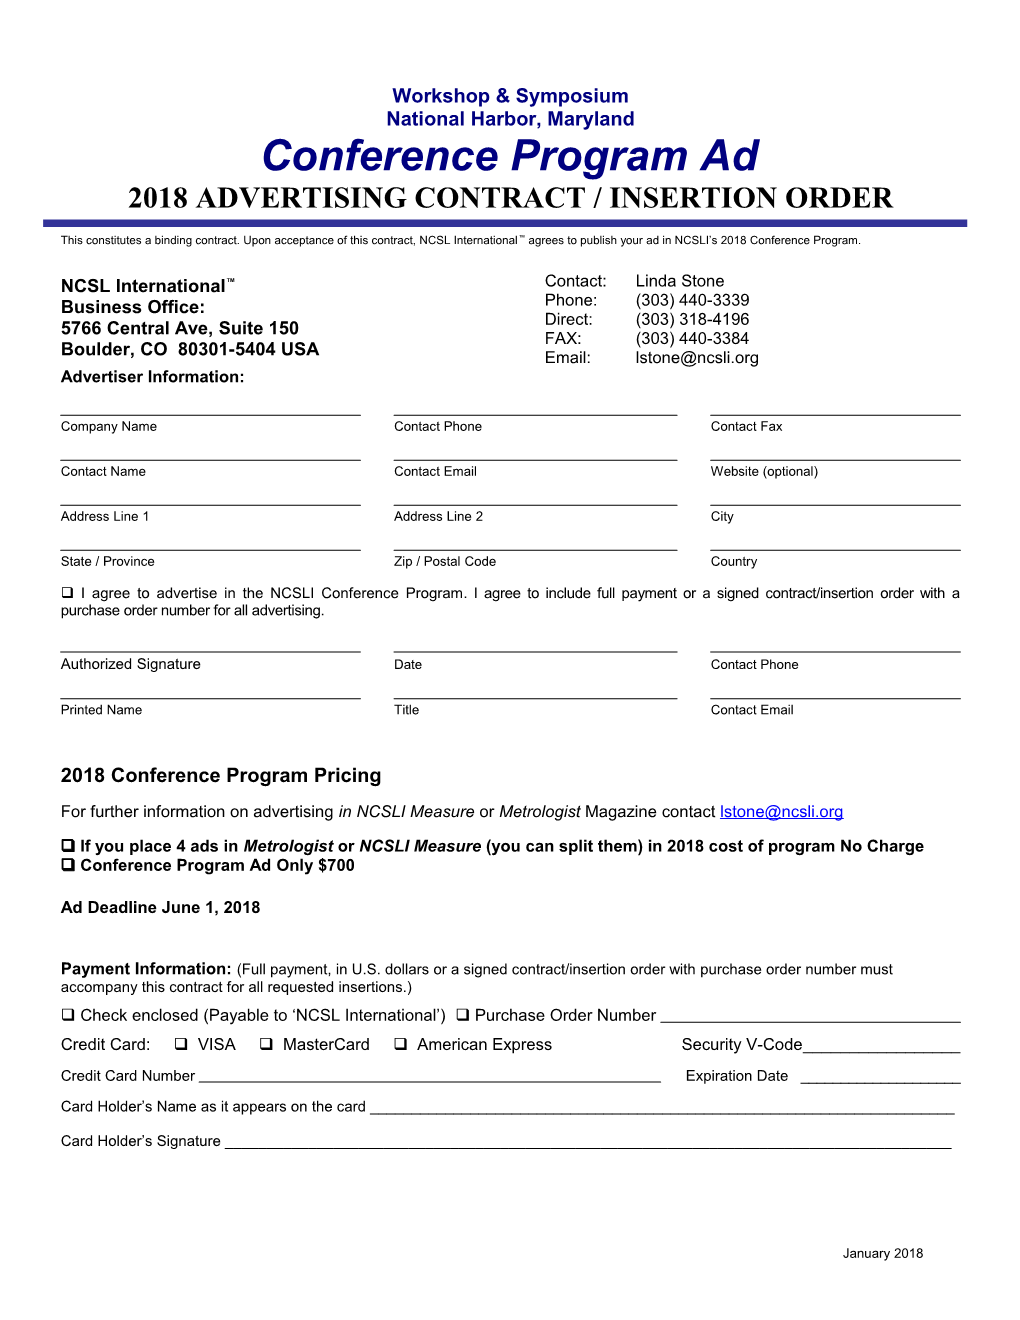 2018 Advertising Contract / Insertion Order